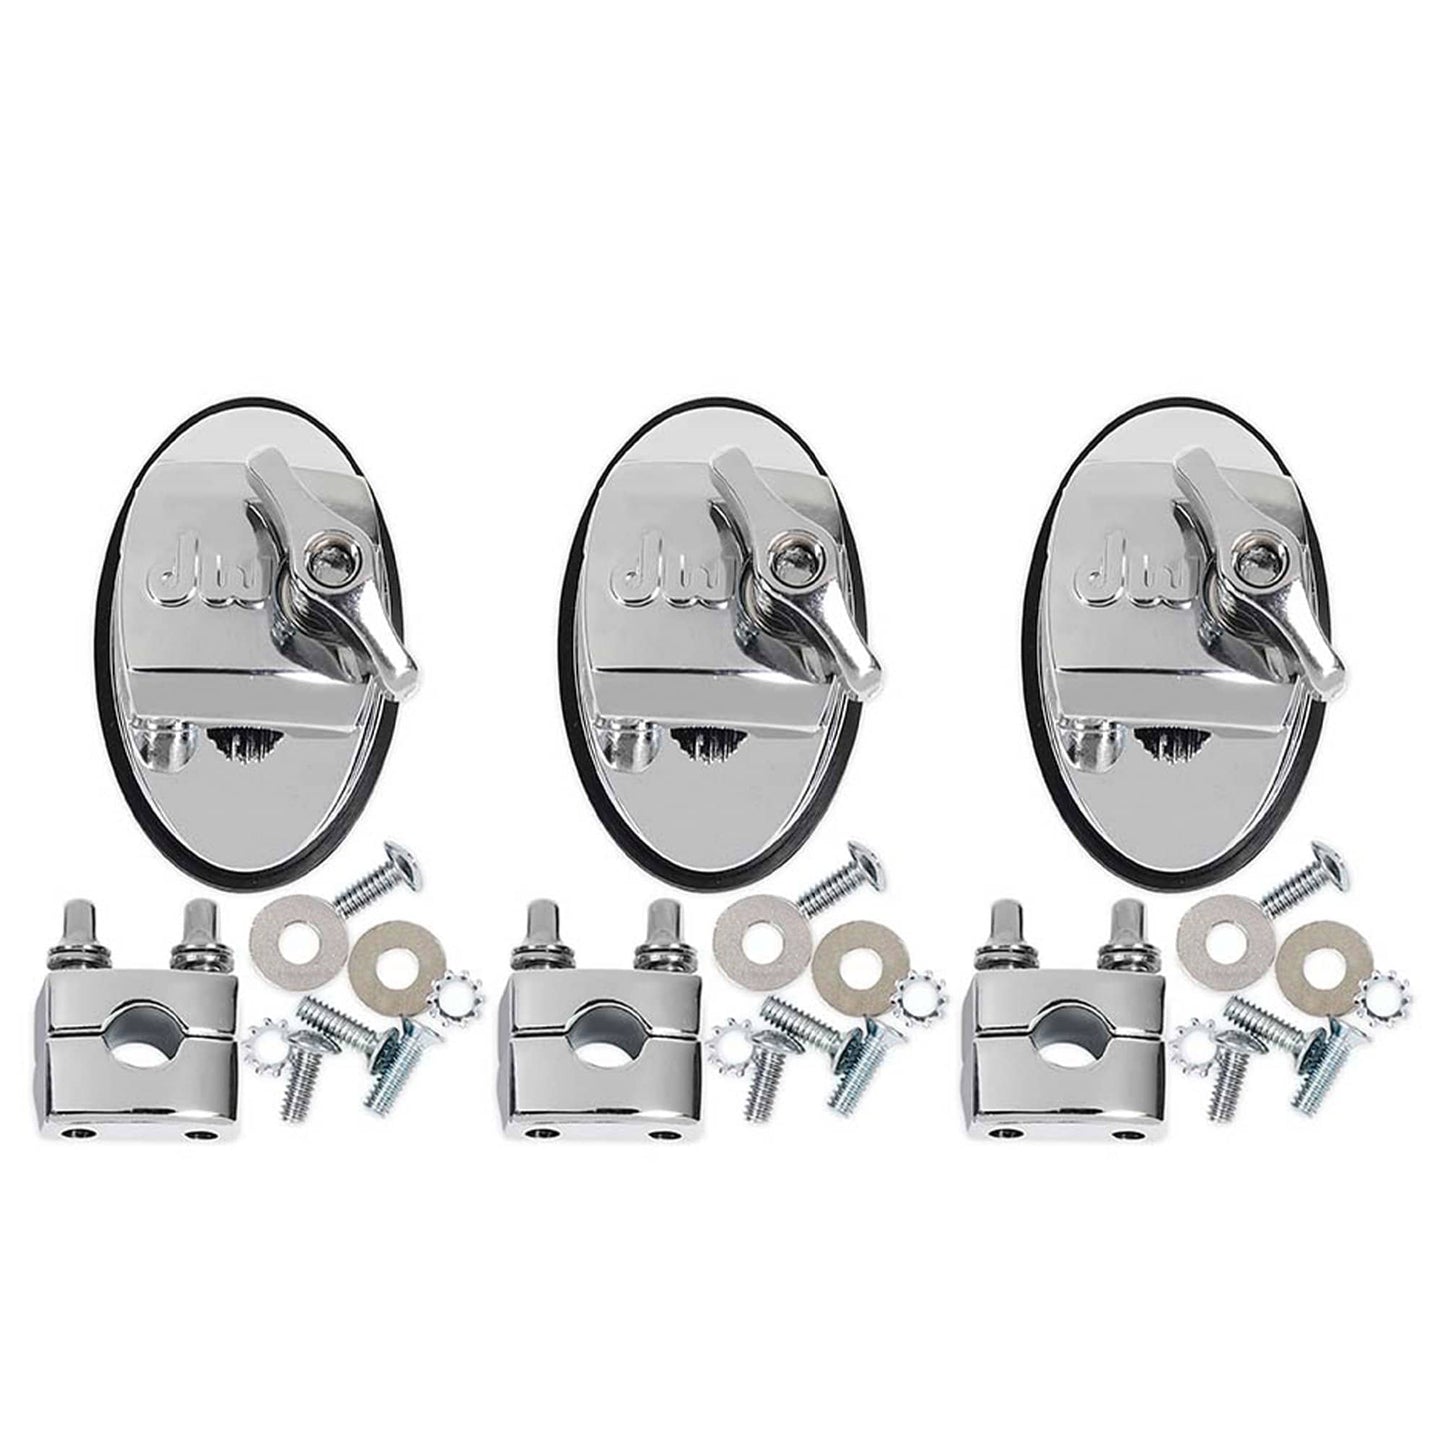 DW Hinged Tom Mounting Bracket Chrome (3 Pack Bundle) Drums and Percussion / Parts and Accessories / Mounts